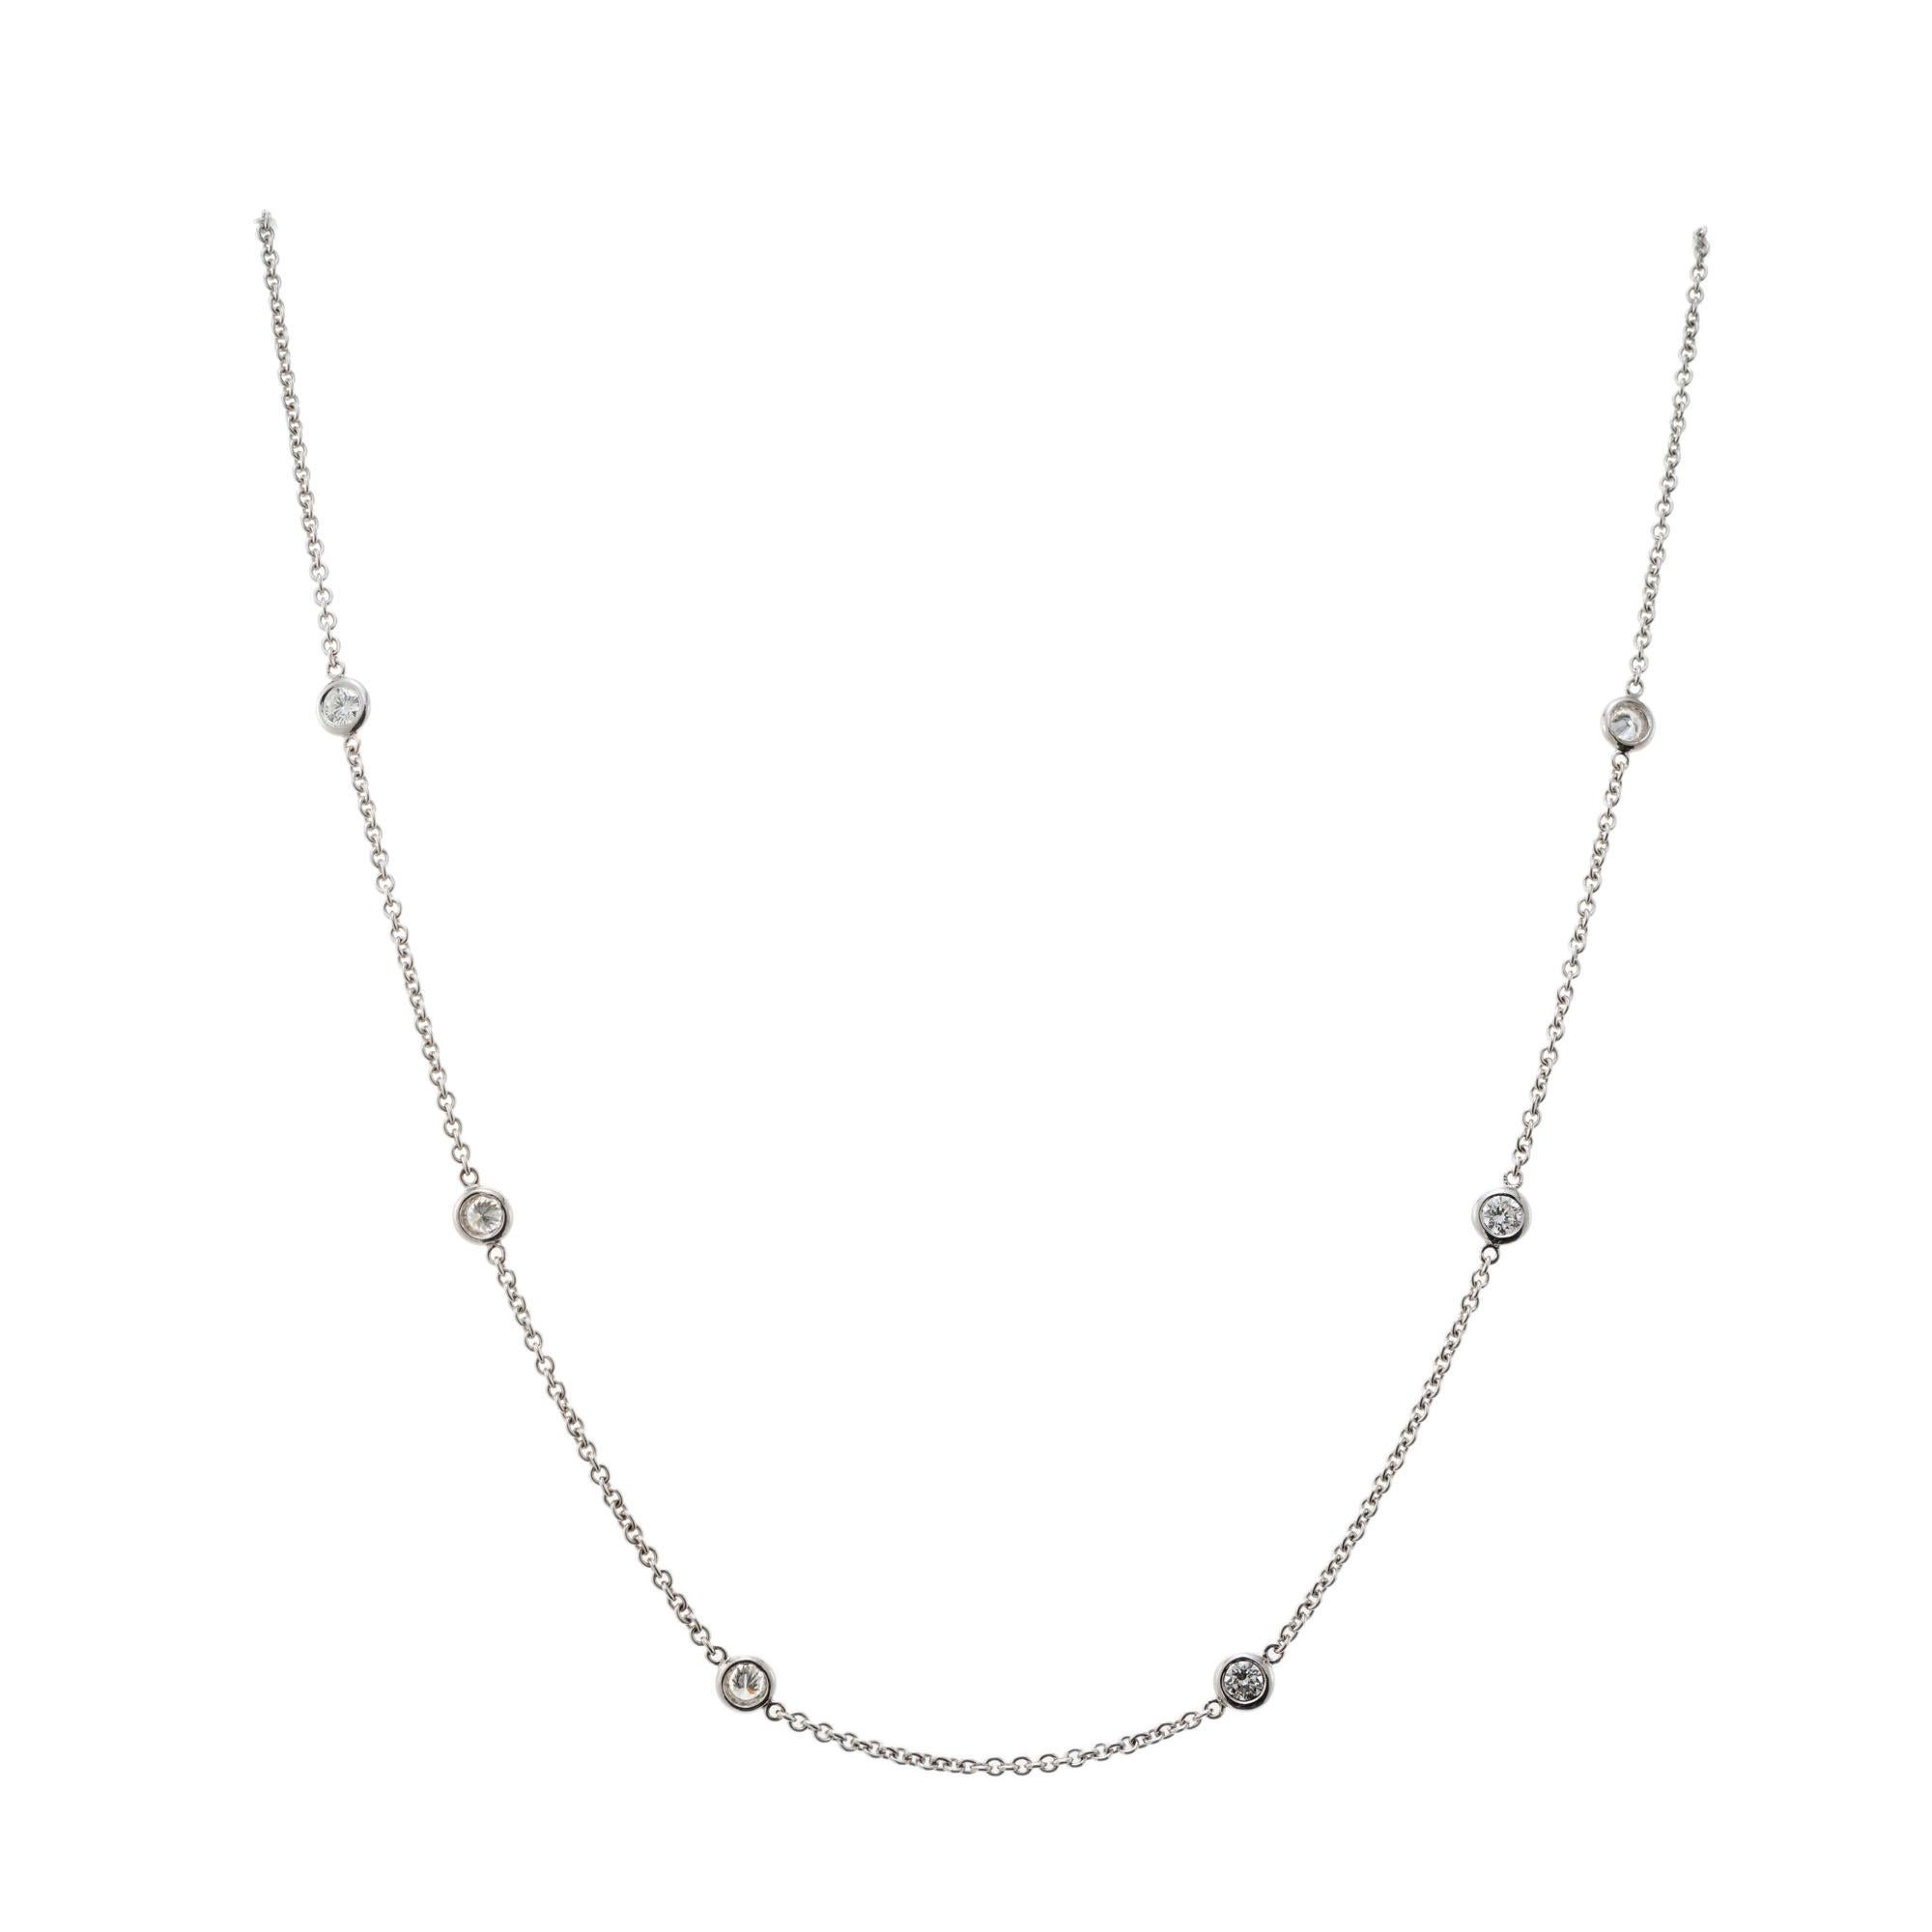 18k white gold 16 Inch necklace set diamond by the yard with six round brilliant cut diamonds.

6 round brilliant cut diamonds, G-H VS-SI approx. .60cts
18k white gold
Stamped: 750
4.1 grams
Chain: 16 Inches
Width: 4.5mm 
Thickness/depth: 1.6mm



